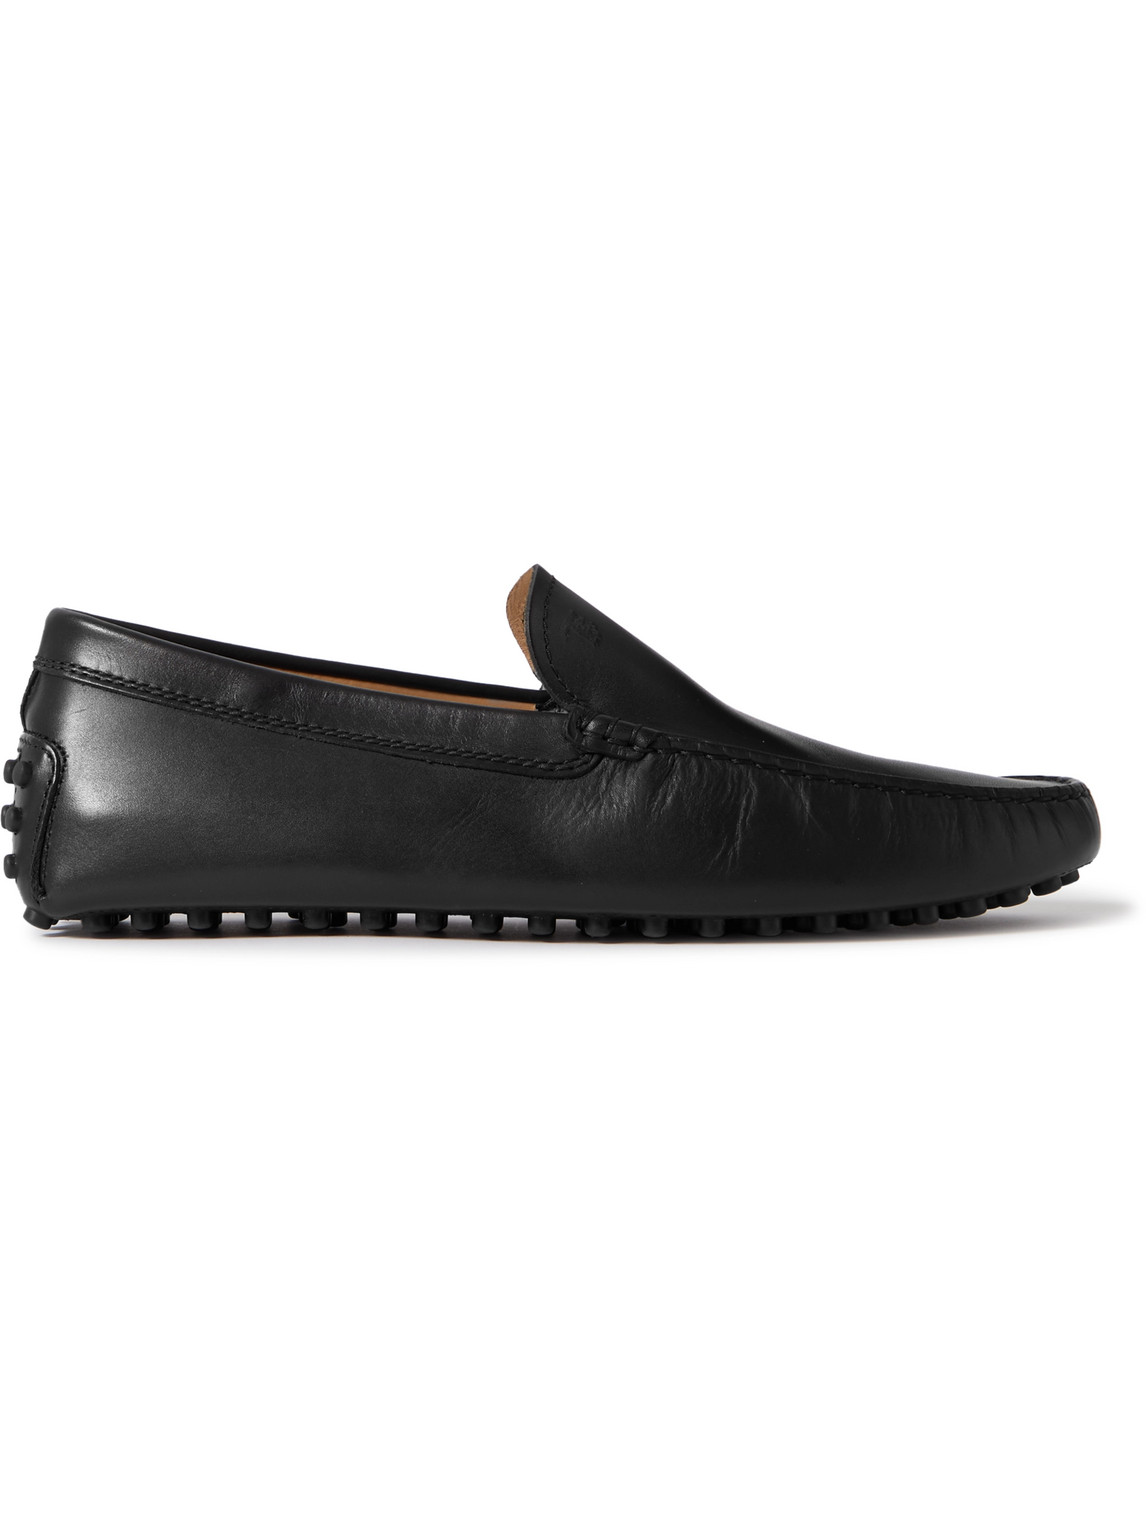 TOD'S GOMMINO LEATHER DRIVING SHOES